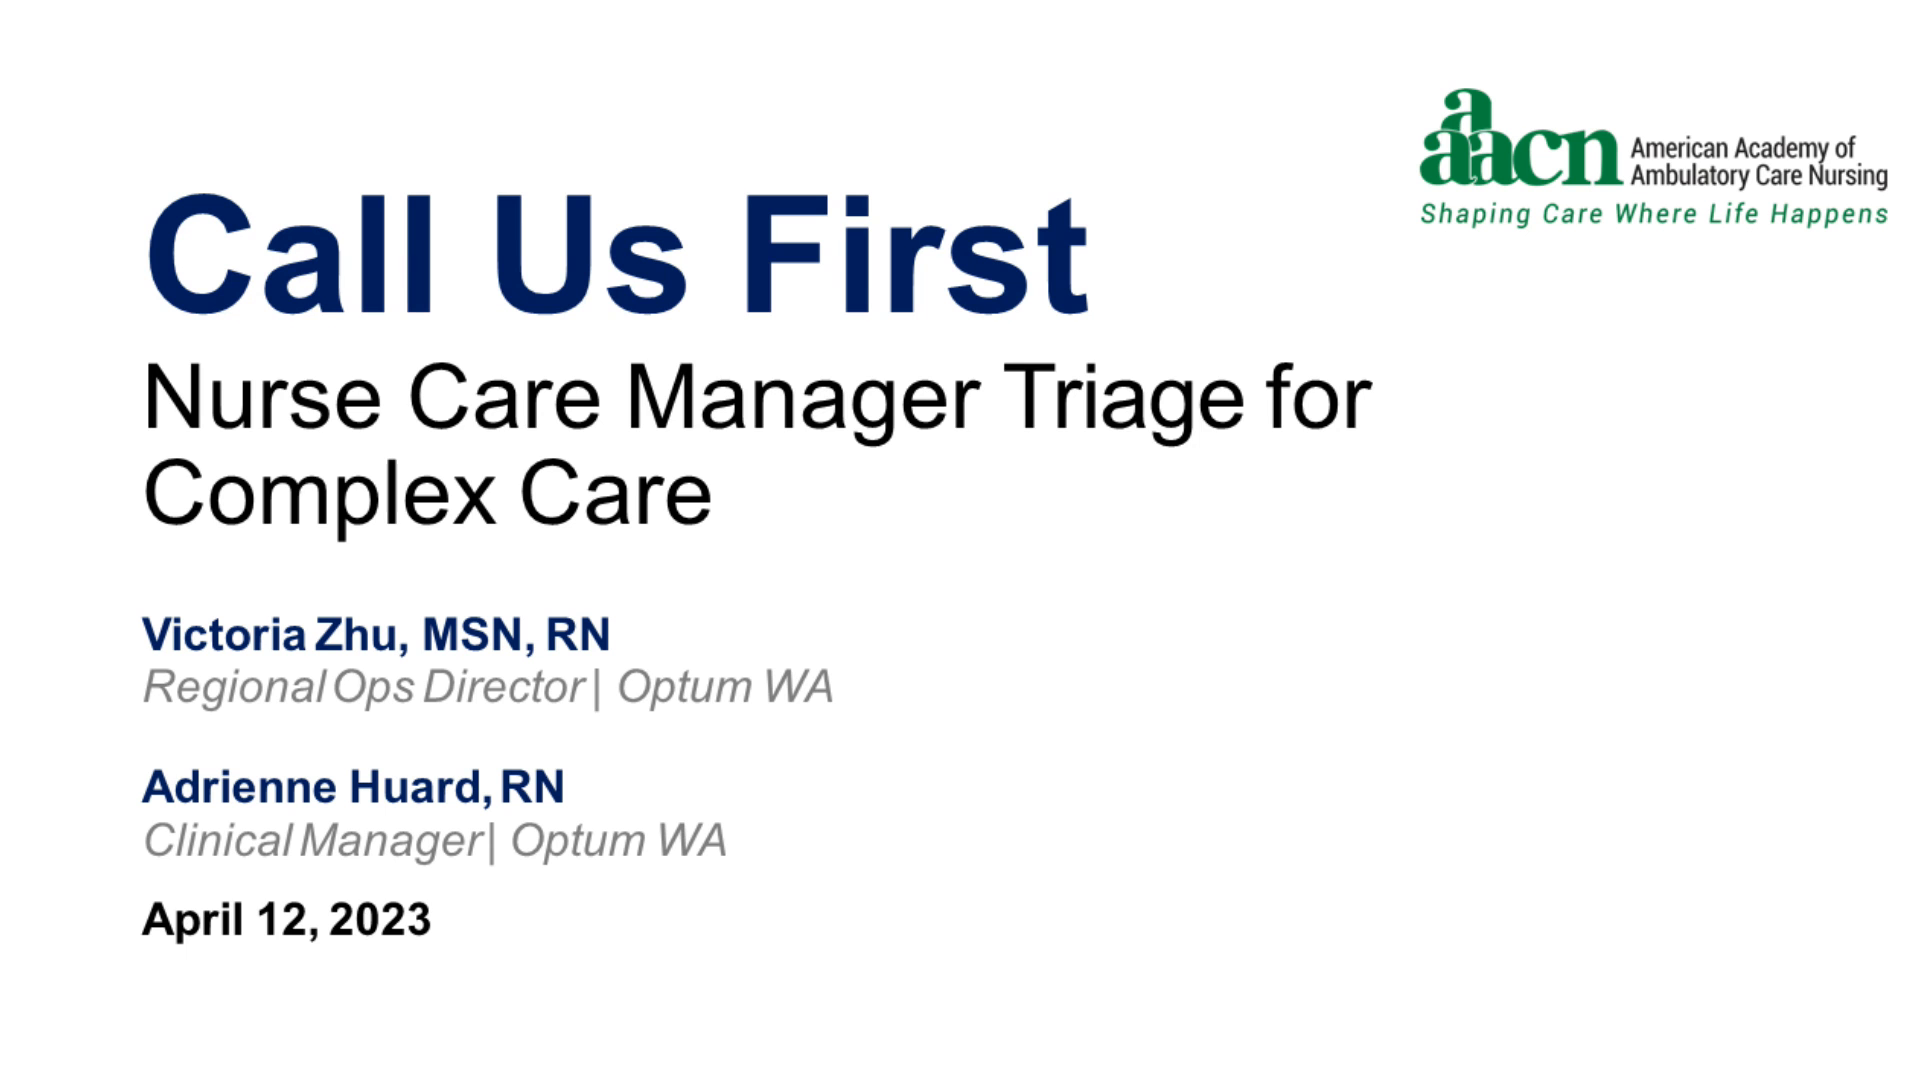 Call Us First: Nurse Care Manager Triage for Complex Care